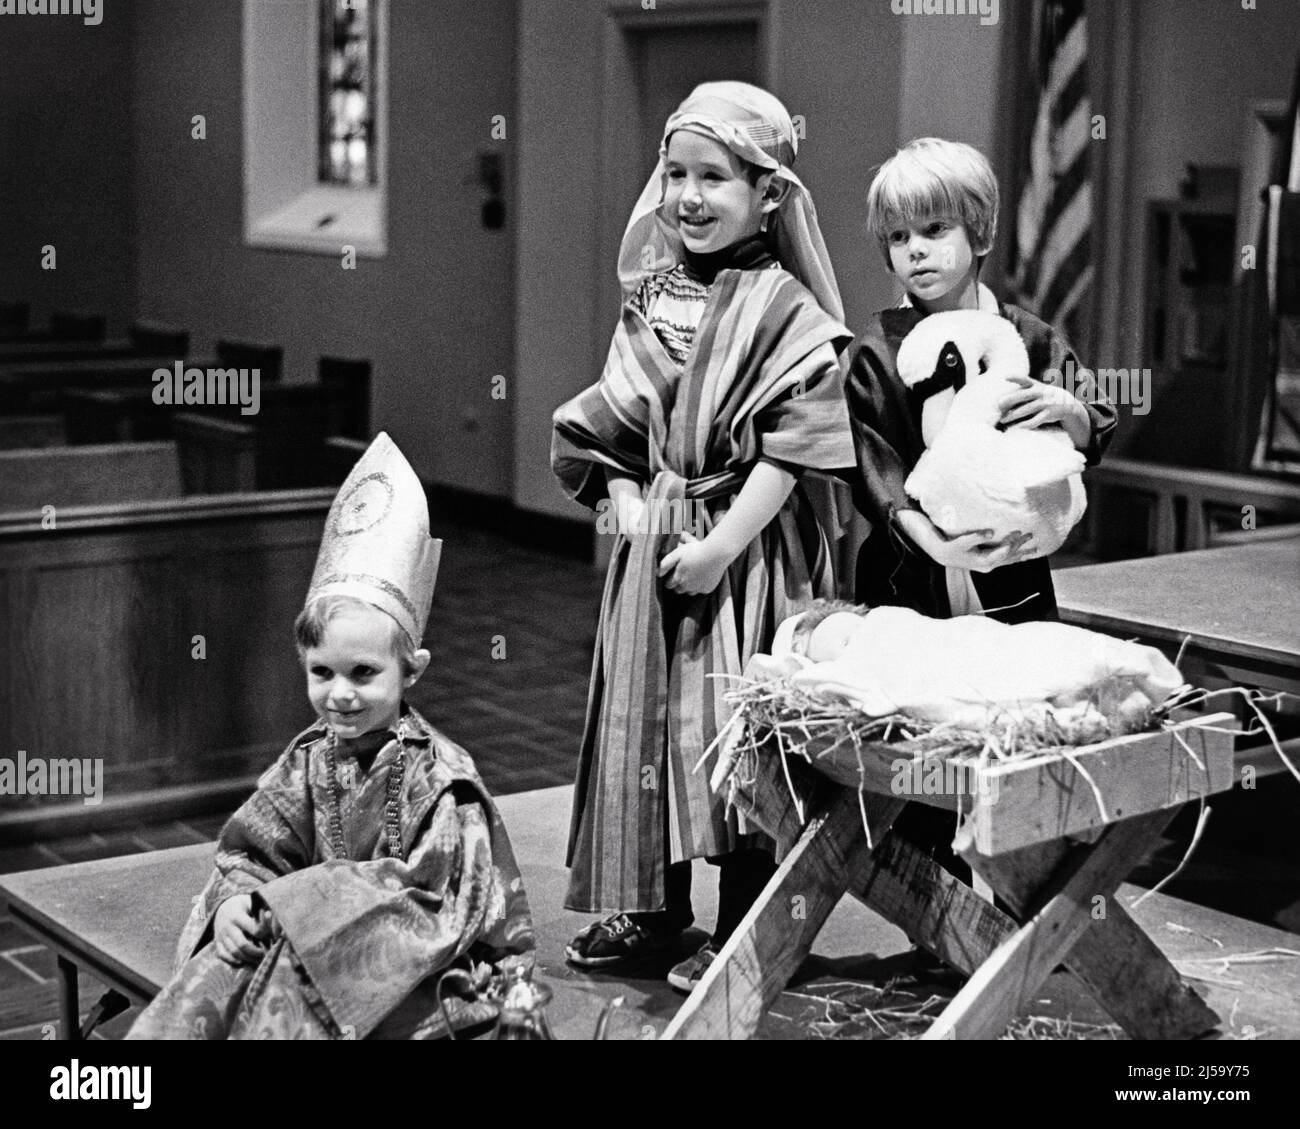 1970s THREE KIDS IN SUNDAY SCHOOL CHRISTMAS PAGEANT WITH BABY JESUS IN MANGER AND THREE WISE MEN BRINGING GIFTS - j14543 HAR001 HARS CELEBRATION FEMALES SUNDAY BETHLEHEM COPY SPACE FULL-LENGTH HALF-LENGTH PERSONS INSPIRATION WISE MALES CHRISTIAN ENTERTAINMENT CONFIDENCE GIFTS B&W HAPPINESS PERFORMER RELIGIOUS ROBES MERRY AND TRADITION IN ENTERTAINER MANGER BEARING DECEMBER BRINGING PAGEANT CONCEPTUAL DECEMBER 25 MAGI ACTORS FRANKINCENSE FAITHFUL MYRRH ENTERTAINERS FAITH GROWTH JOYOUS JUVENILES PERFORMERS TOGETHERNESS BELIEF BIBLICAL BLACK AND WHITE CAUCASIAN ETHNICITY HAR001 KINGS Stock Photo